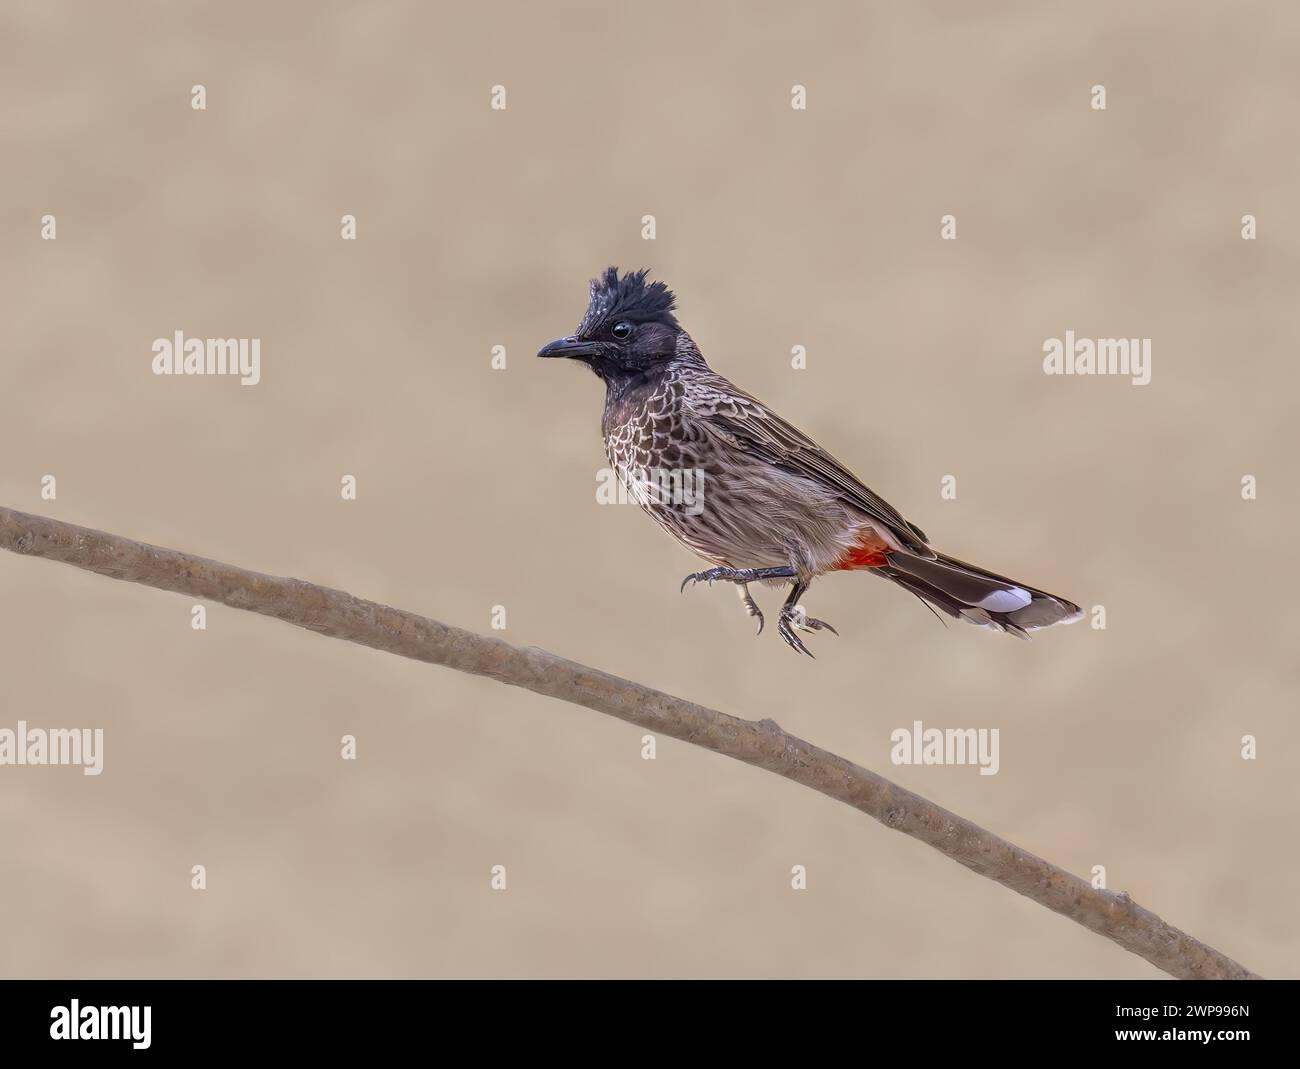 red-vented bulbul, Pycnonotus cafer, leaping on a twig, this Asian bird species is an invasive alien species spreading in Fuerteventura Canary Islands Stock Photo